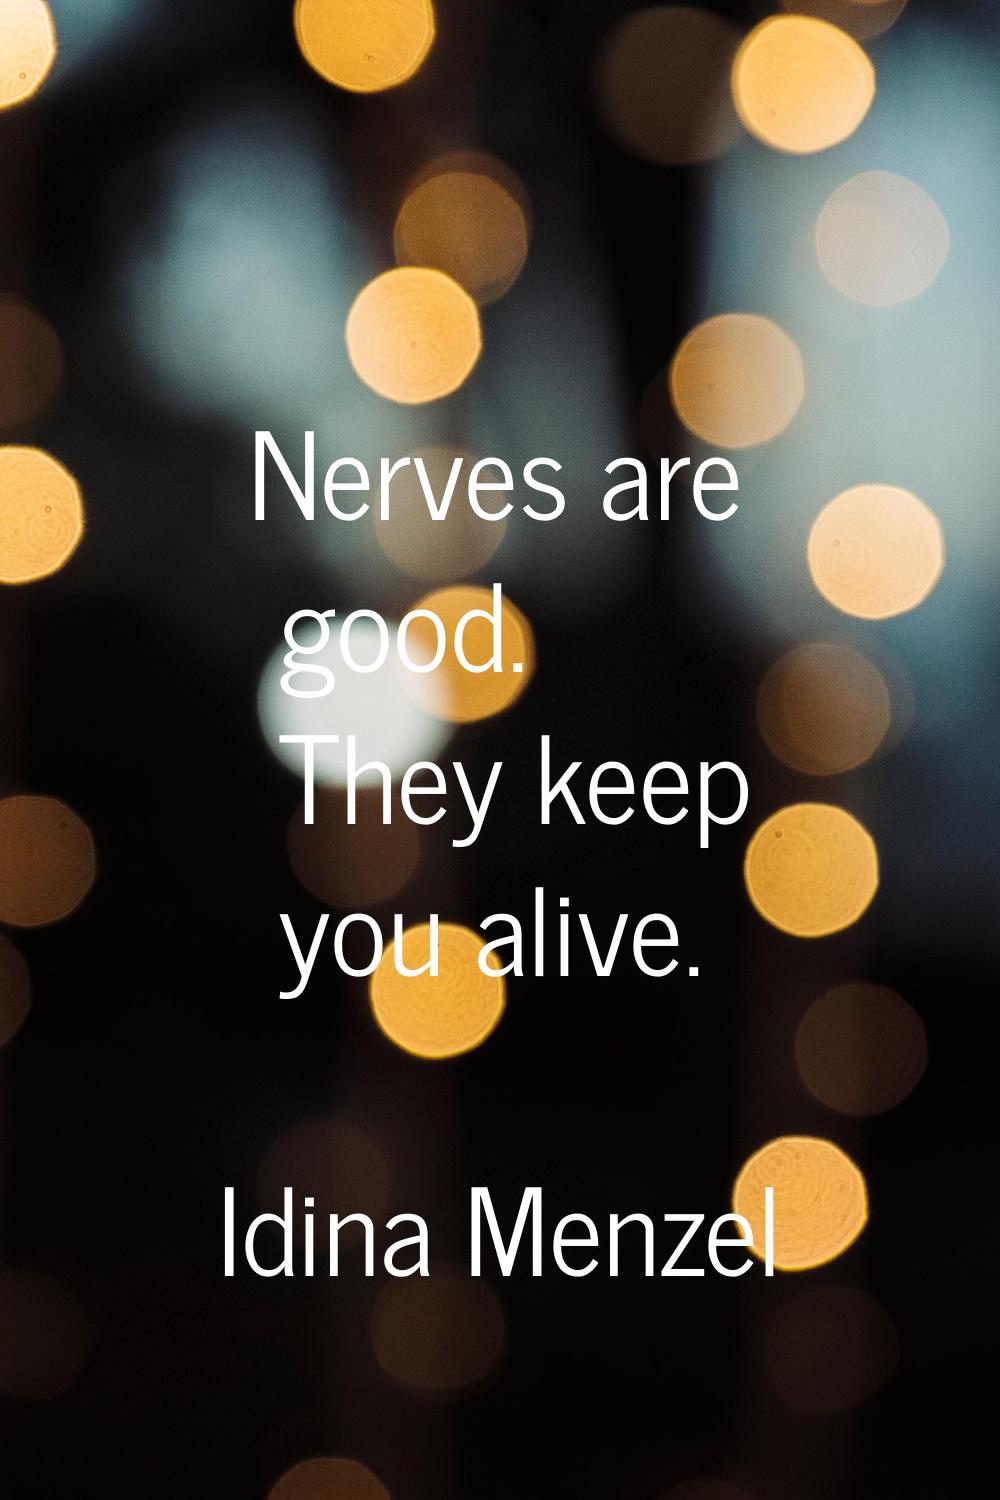 Nerves are good. They keep you alive.